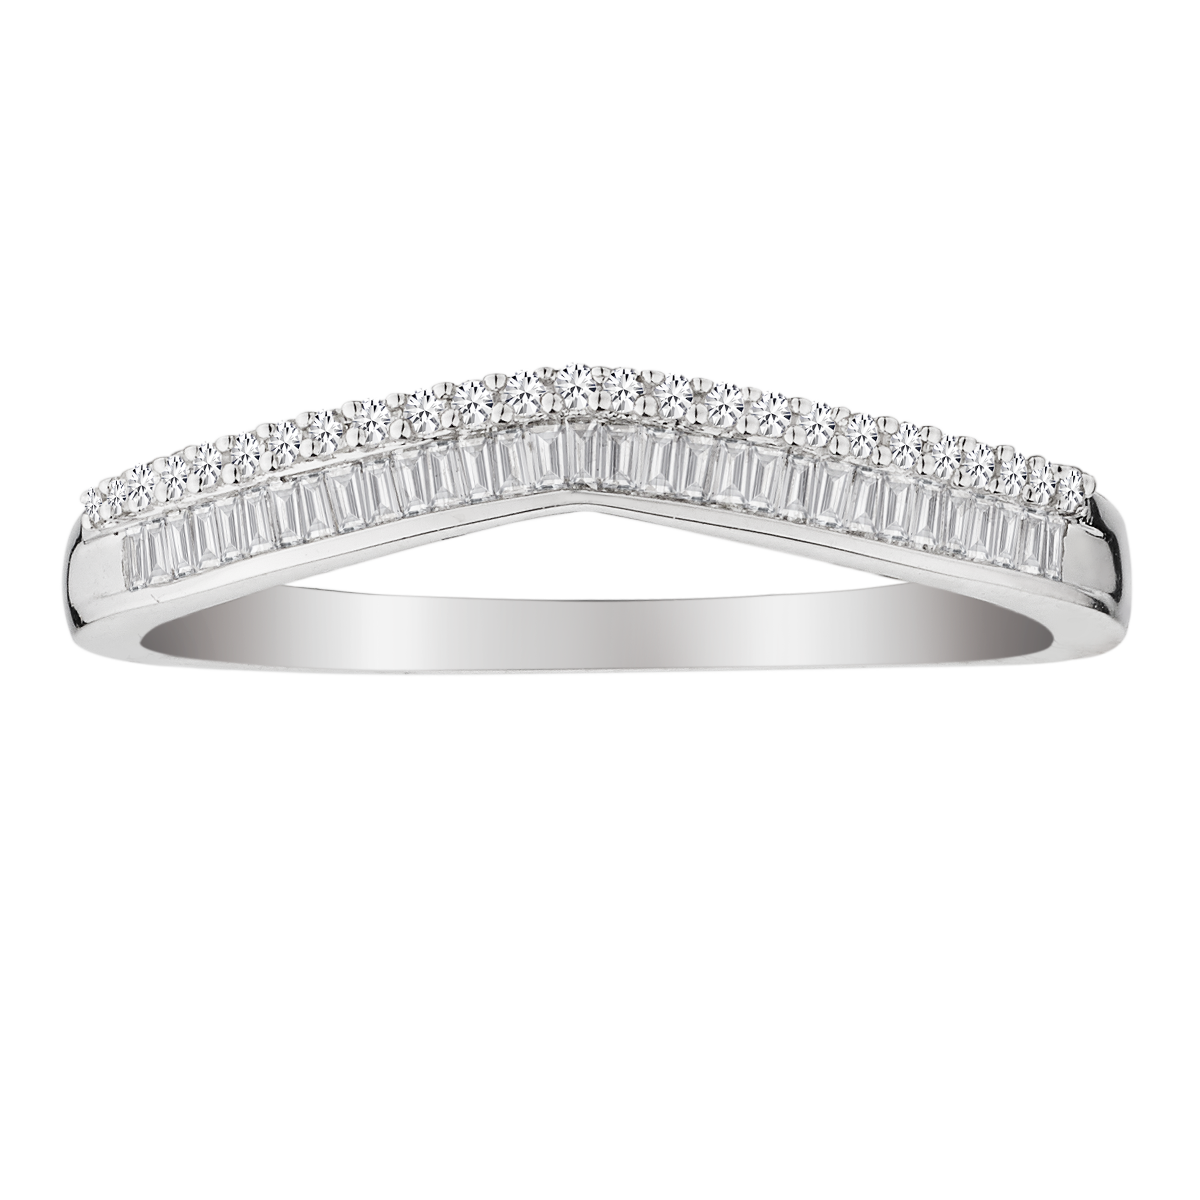 .25 CARAT DIAMOND CURVED BAND, 14kt WHITE GOLD......................NOW